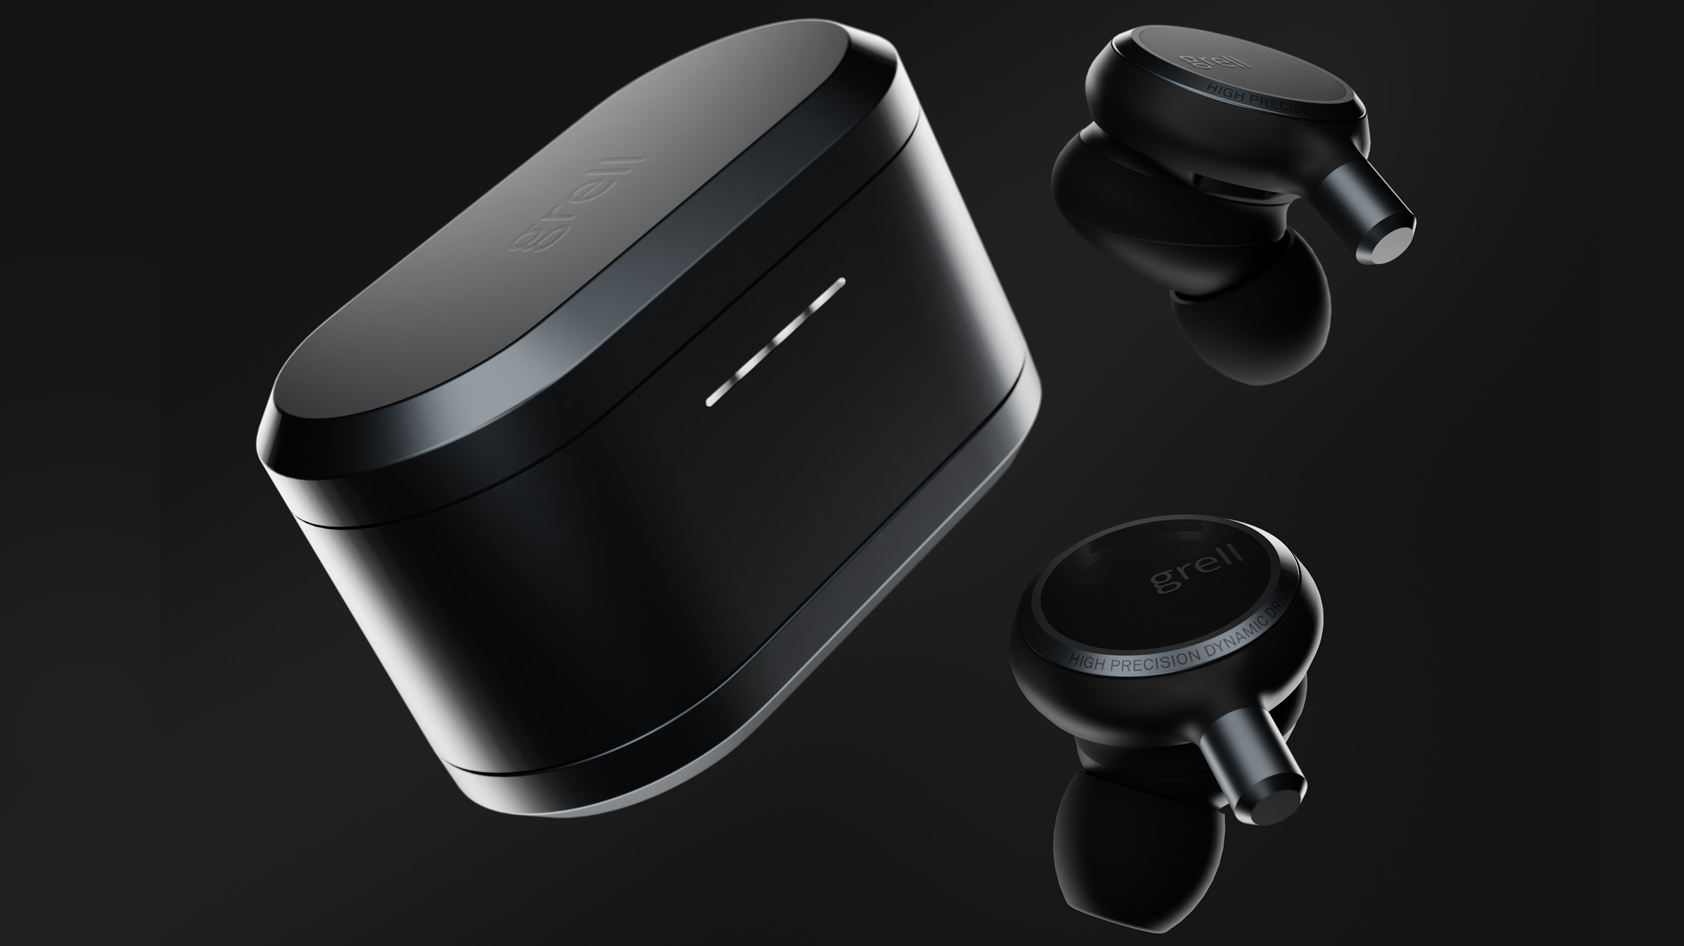 A product render of the grell tws-1 true wireless noise-cancelling earphones and case.